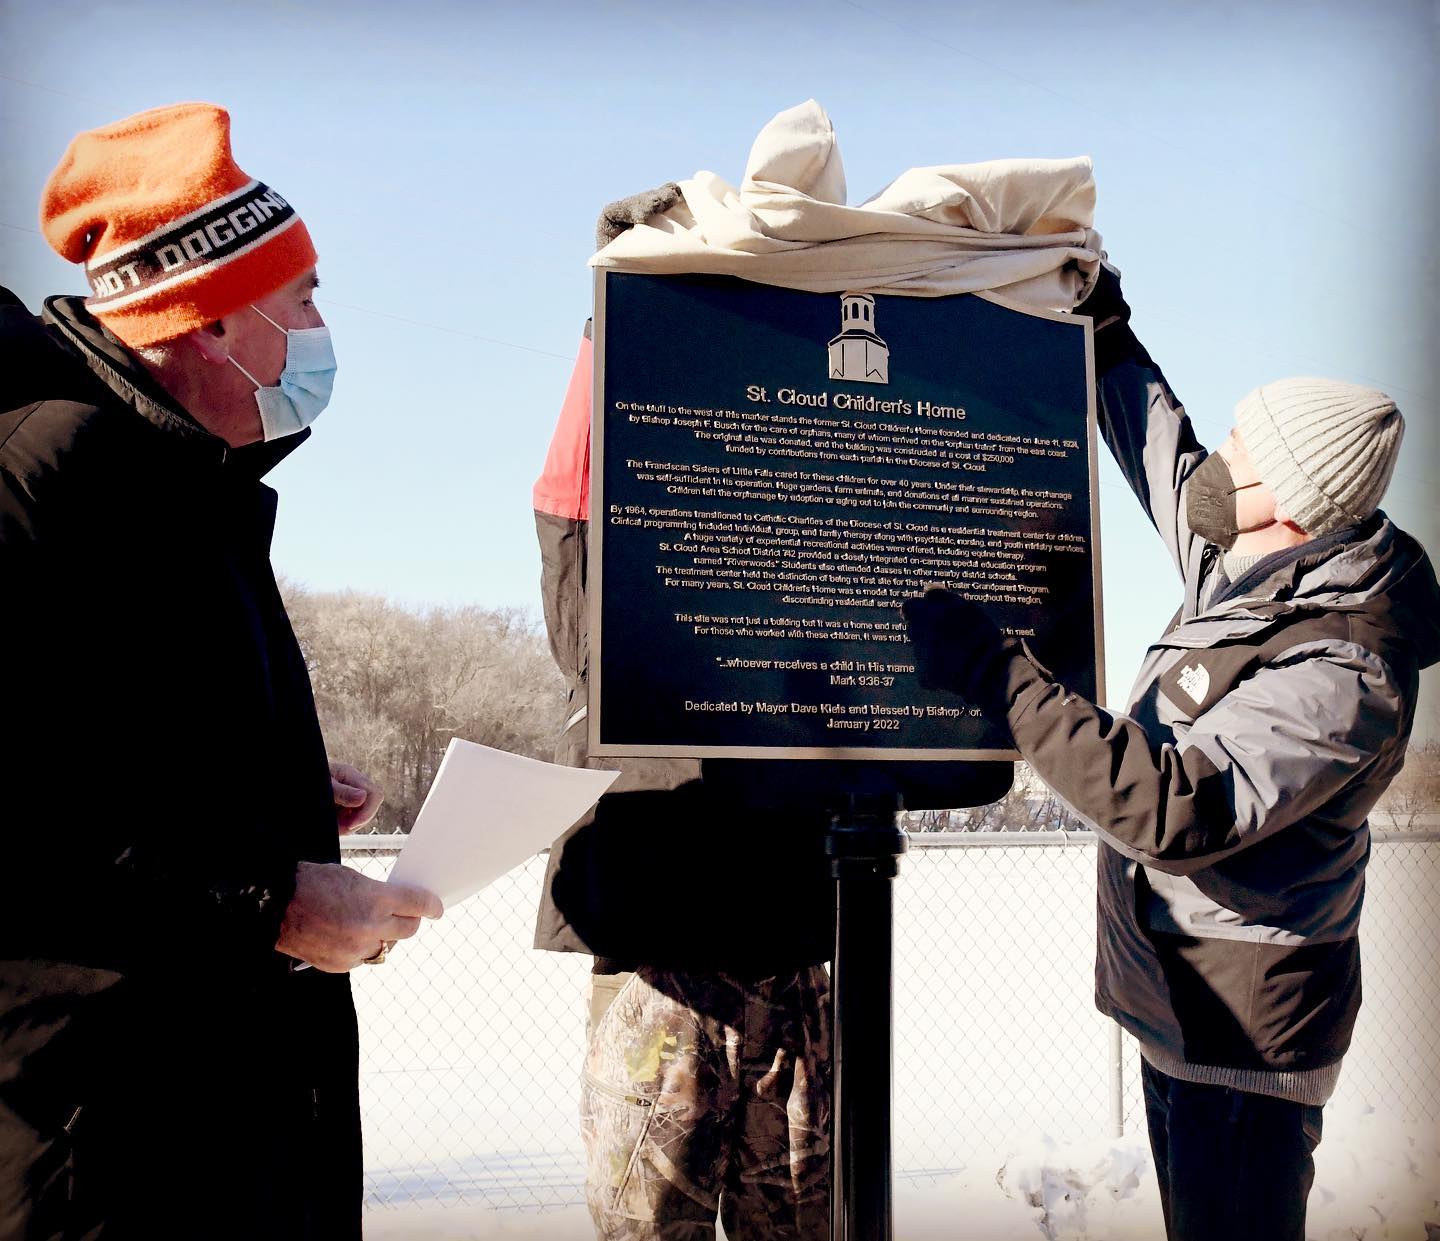 "I’m so pleased that we can do this as a real memorial,” Bishop Donald Kettler said during the unveiling of a historical marker honoring the former St. Cloud Children’s Home Jan. 20. “People will see this and remember,” he said.

The marker is located on the Beaver Island Trail along the Mississippi River in St. Cloud with the bell tower of the Children's Home building visible in the distance behind it. During the event, the marker was dedicated by St. Cloud Mayor Dave Kleis and blessed by Bishop Kettler.

The  St. Cloud Children’s Home was founded in 1924 for the care of orphans and the Franciscan Sisters of Little Falls were involved there for over 40 years. In the mid-1960s, operations transitioned to Catholic Charities of the Diocese of St. Cloud, MN as a residential treatment center for youth. The diocese sold the Children’s Home property in the fall of 2020. #beaverislandtrail #history #stcloudmn #catholicsofinstagram #visitstcloud